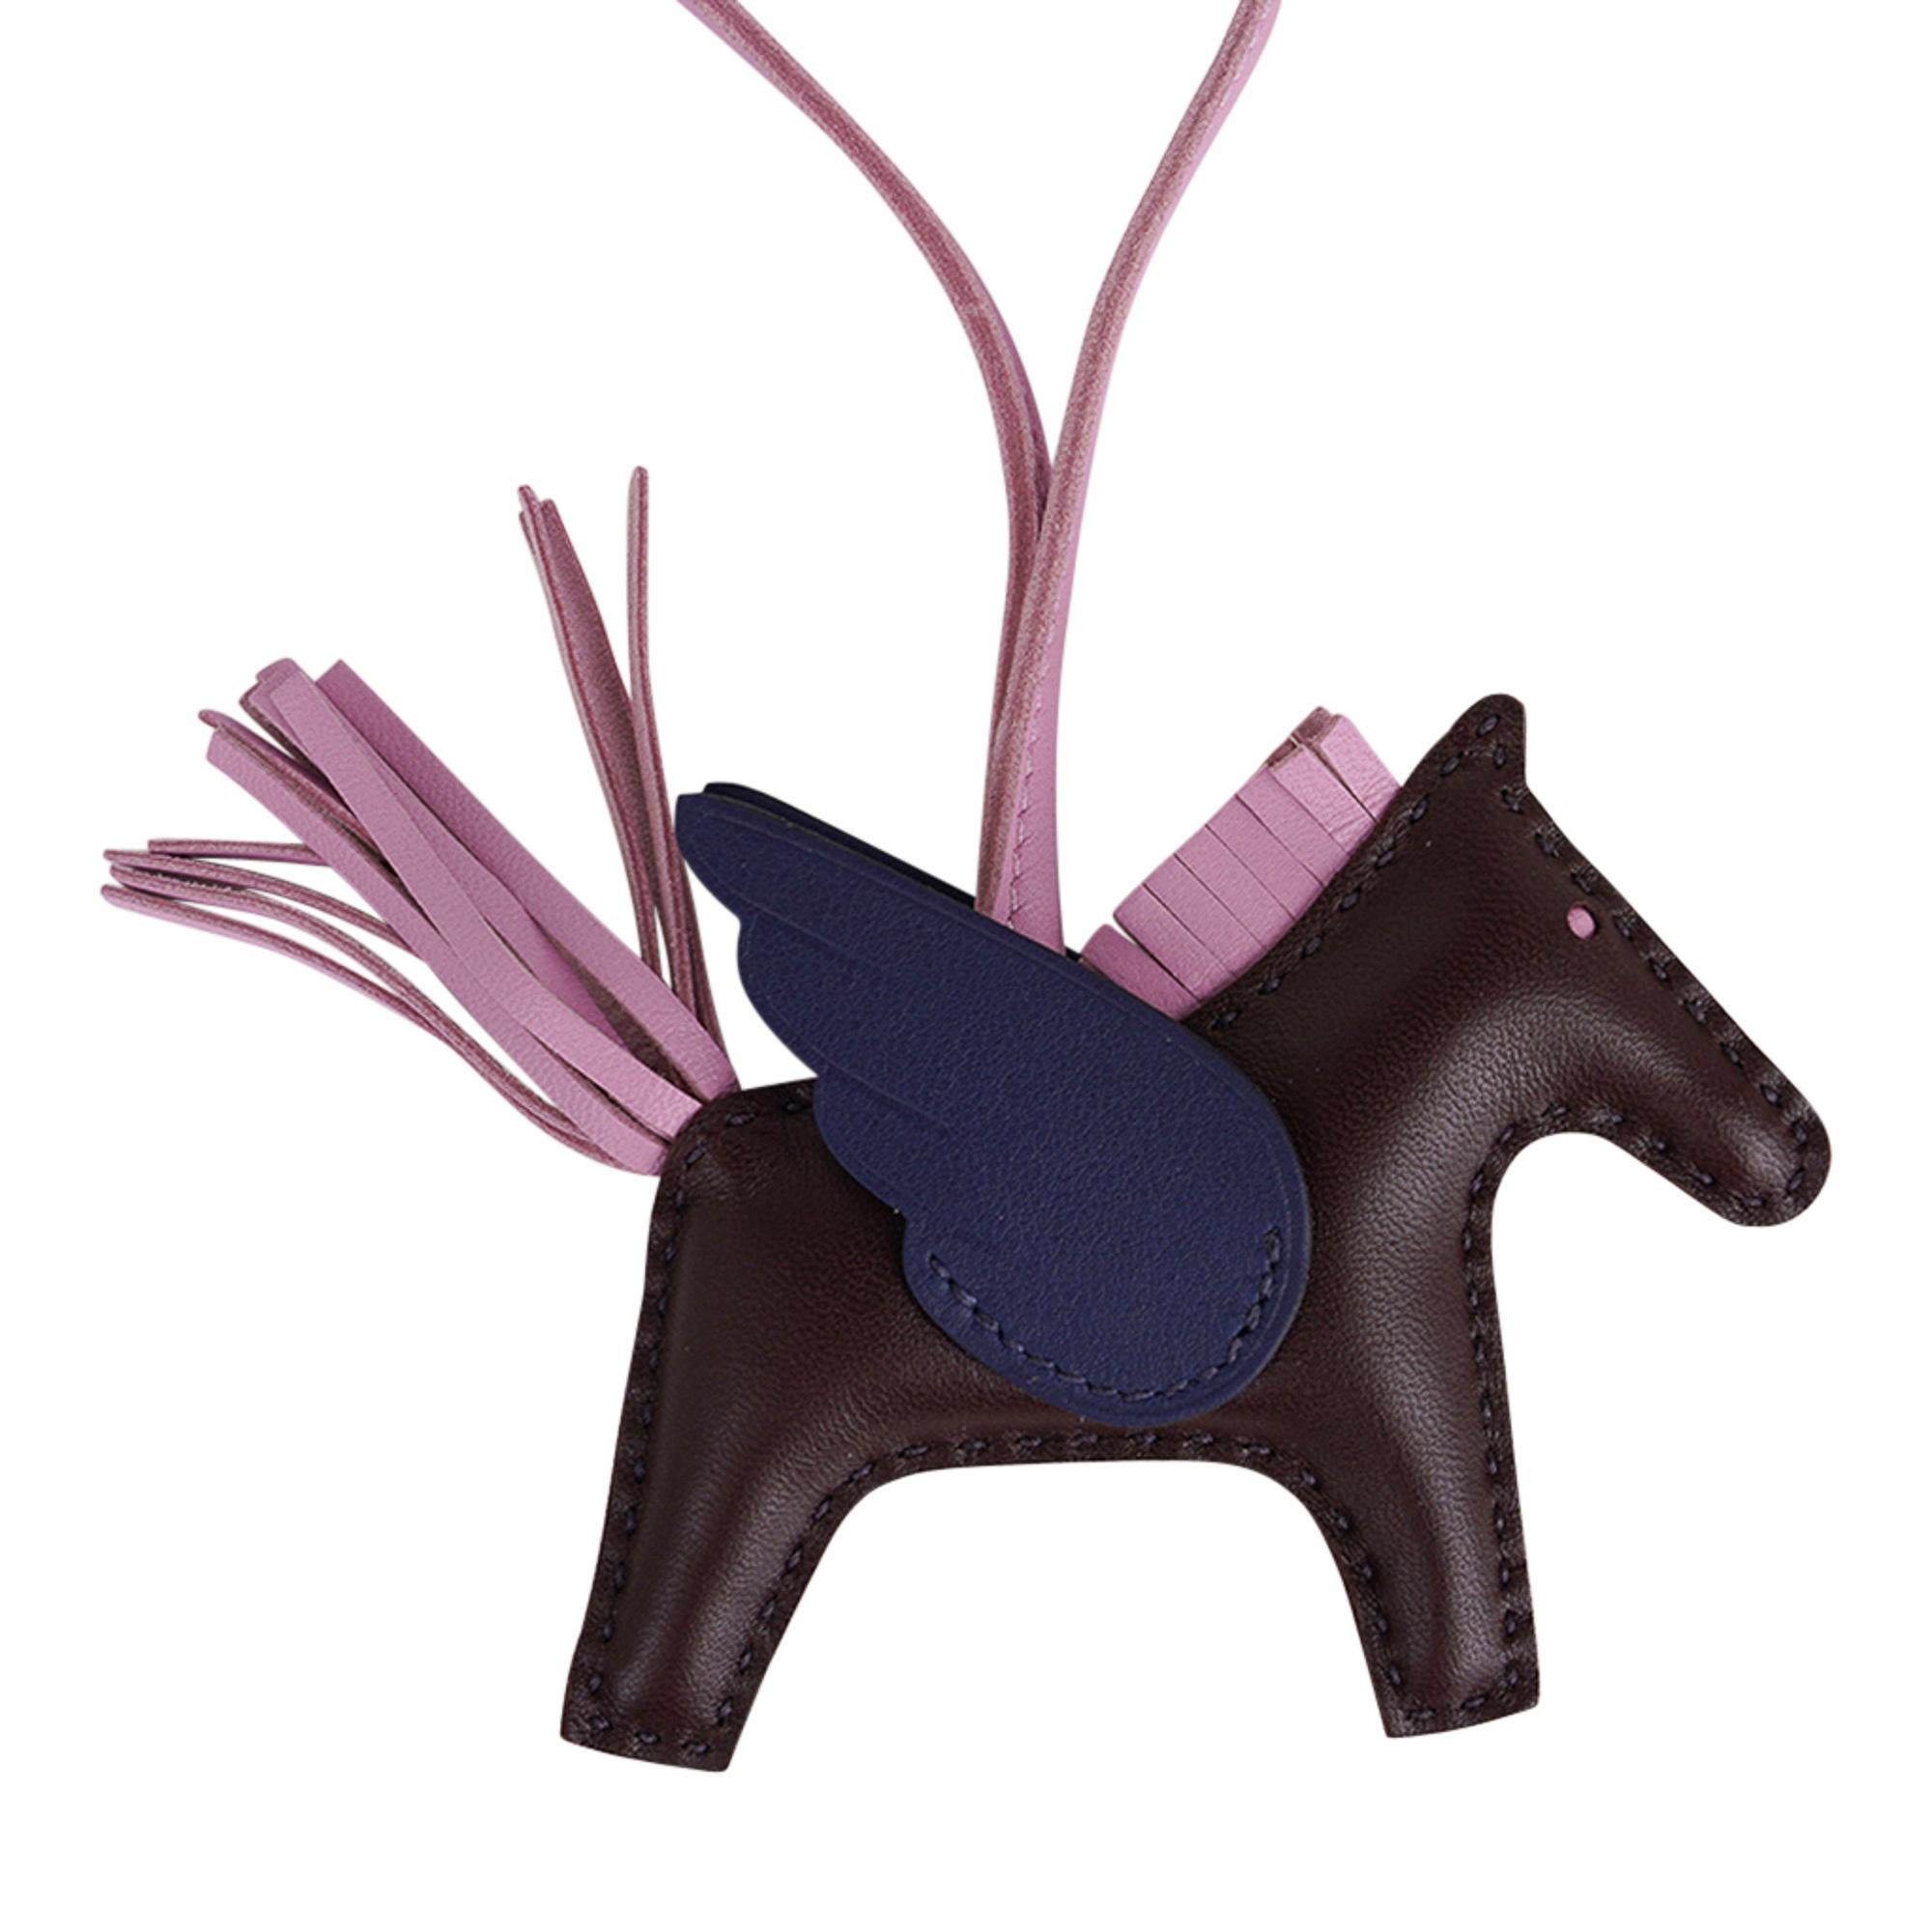 Mightychic offers an Hermes PM Rodeo bag charm featured in Rouge Sellier,  Blue Sapphire and Mauve Sylvestre
Charming and playful she easily adorns a myriad bag colours in your fabulous collection. 
Leather is lambskin Milo.
Signature HERMES PARIS